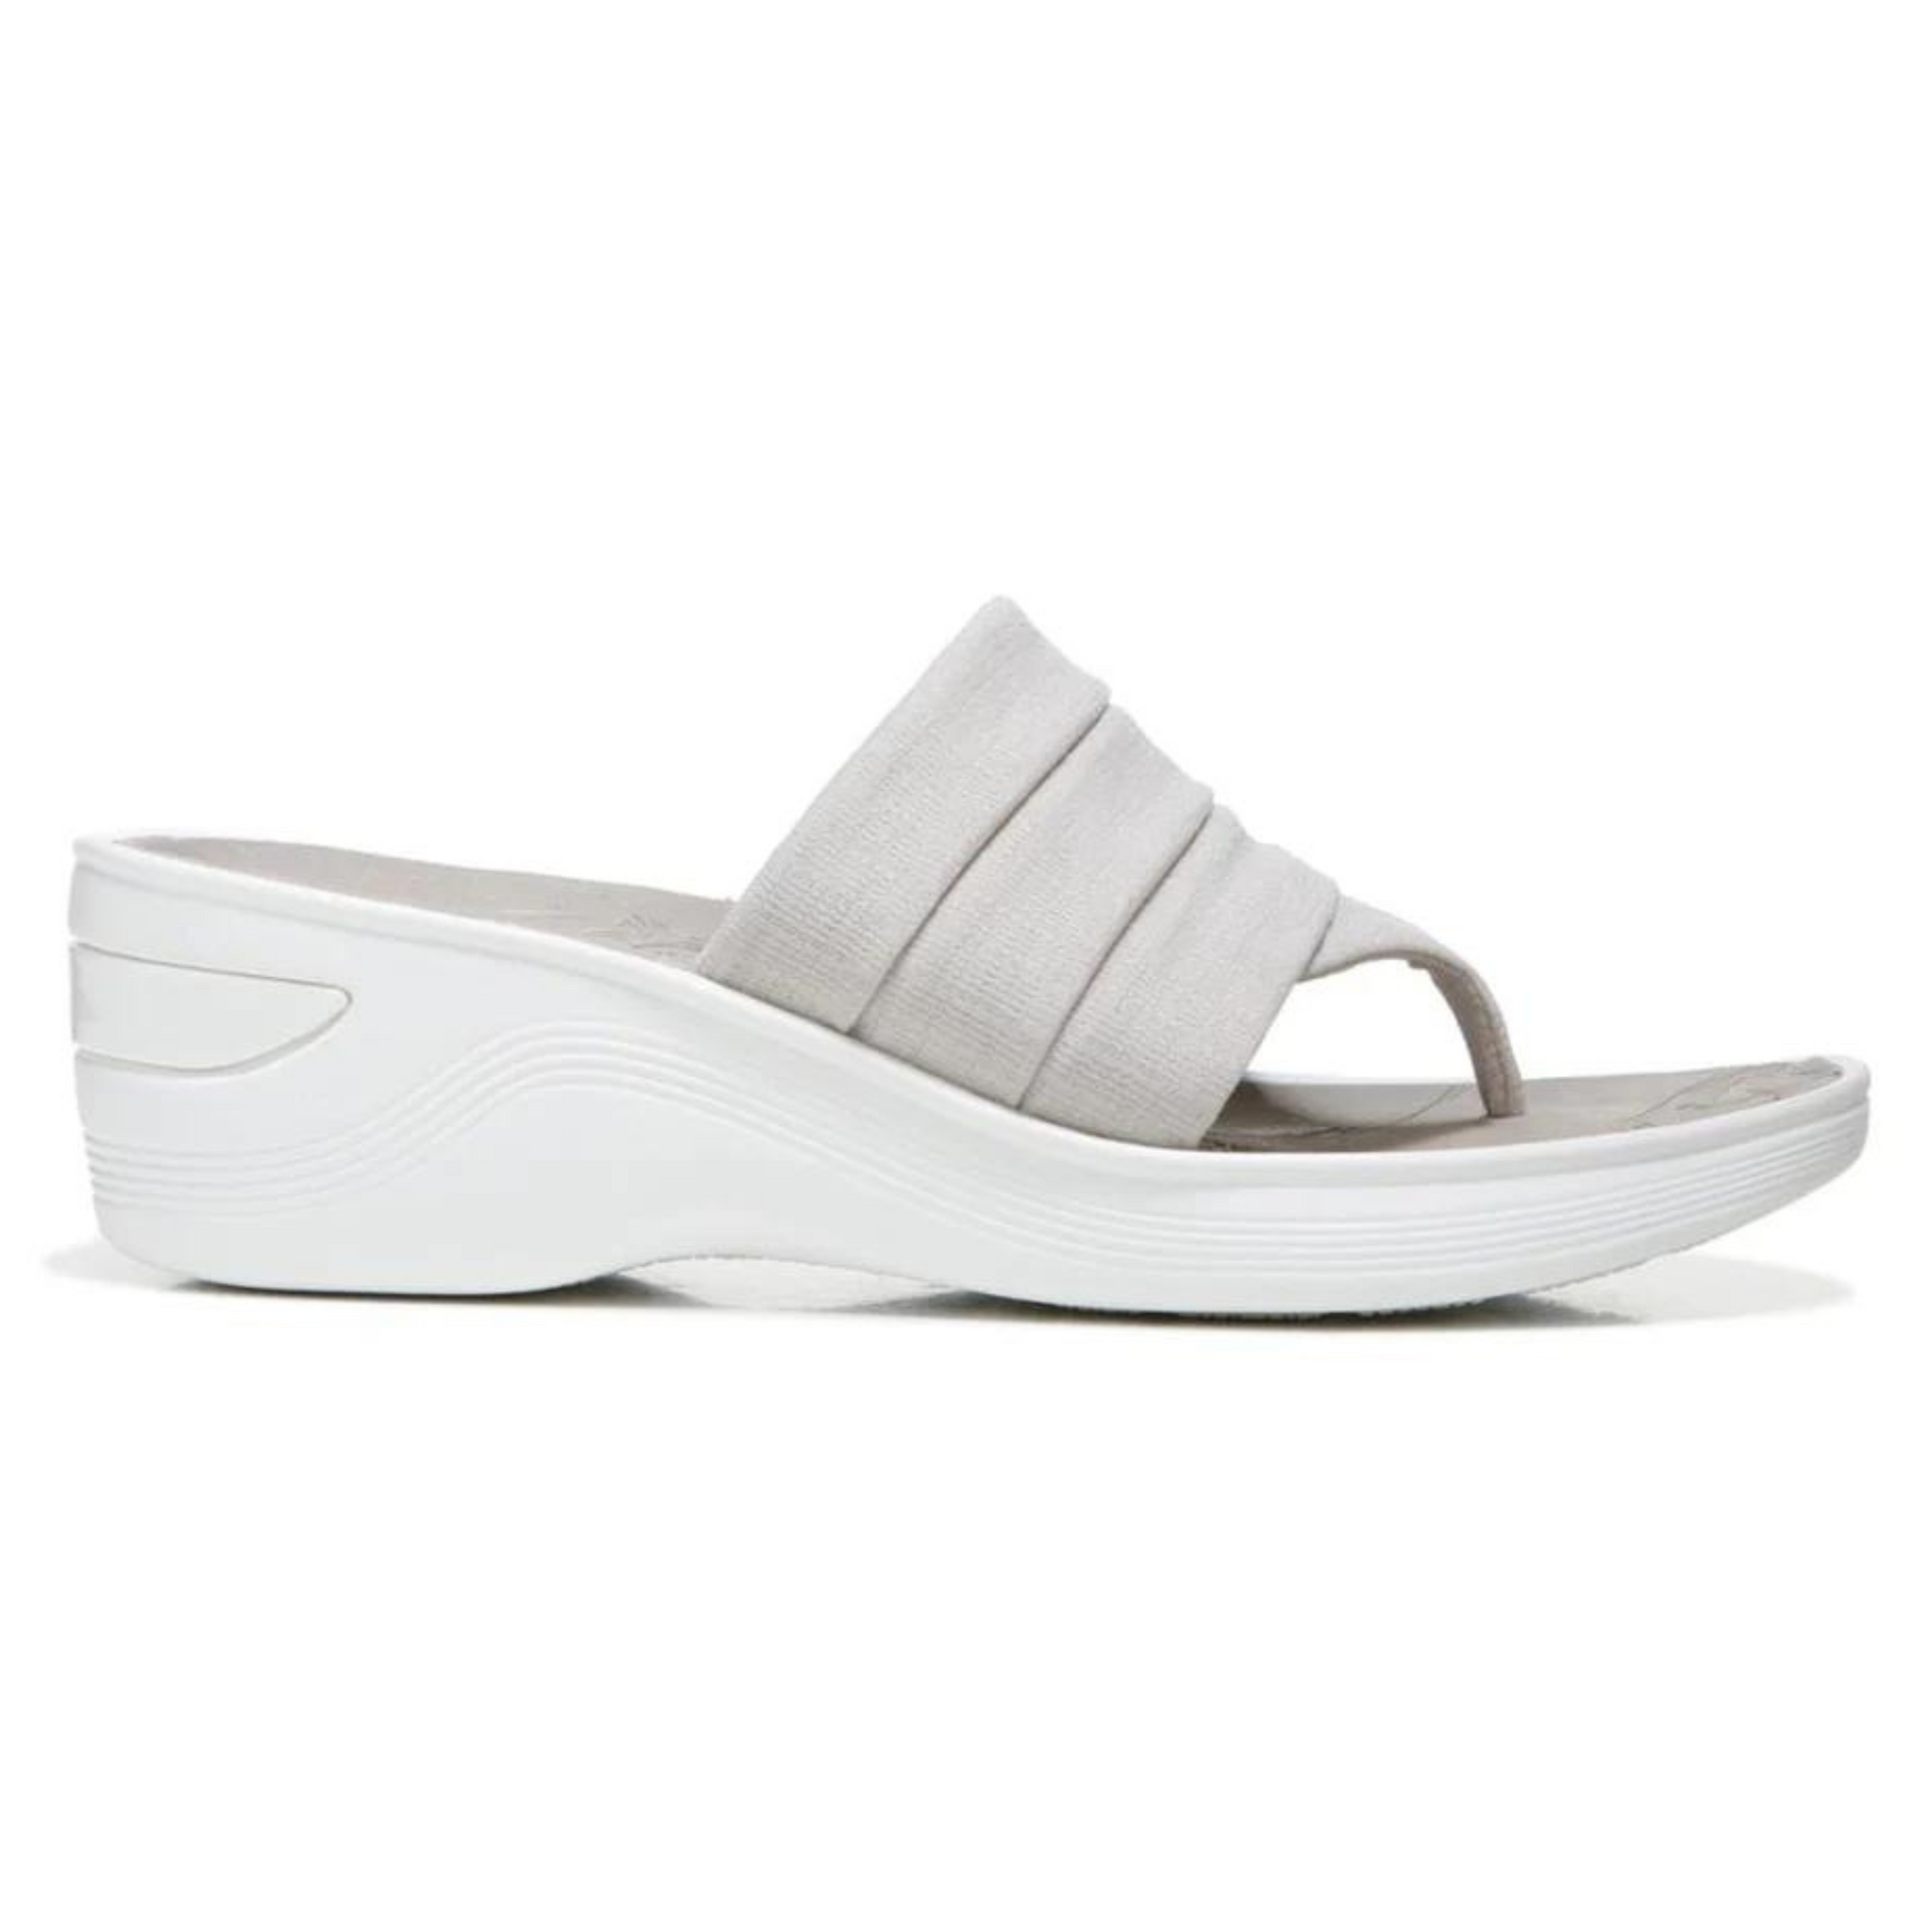 A grey sandal is pictured in profile with pleated upper strap and thong toe holder. The footbed is grey while the white wedge outsole is white.